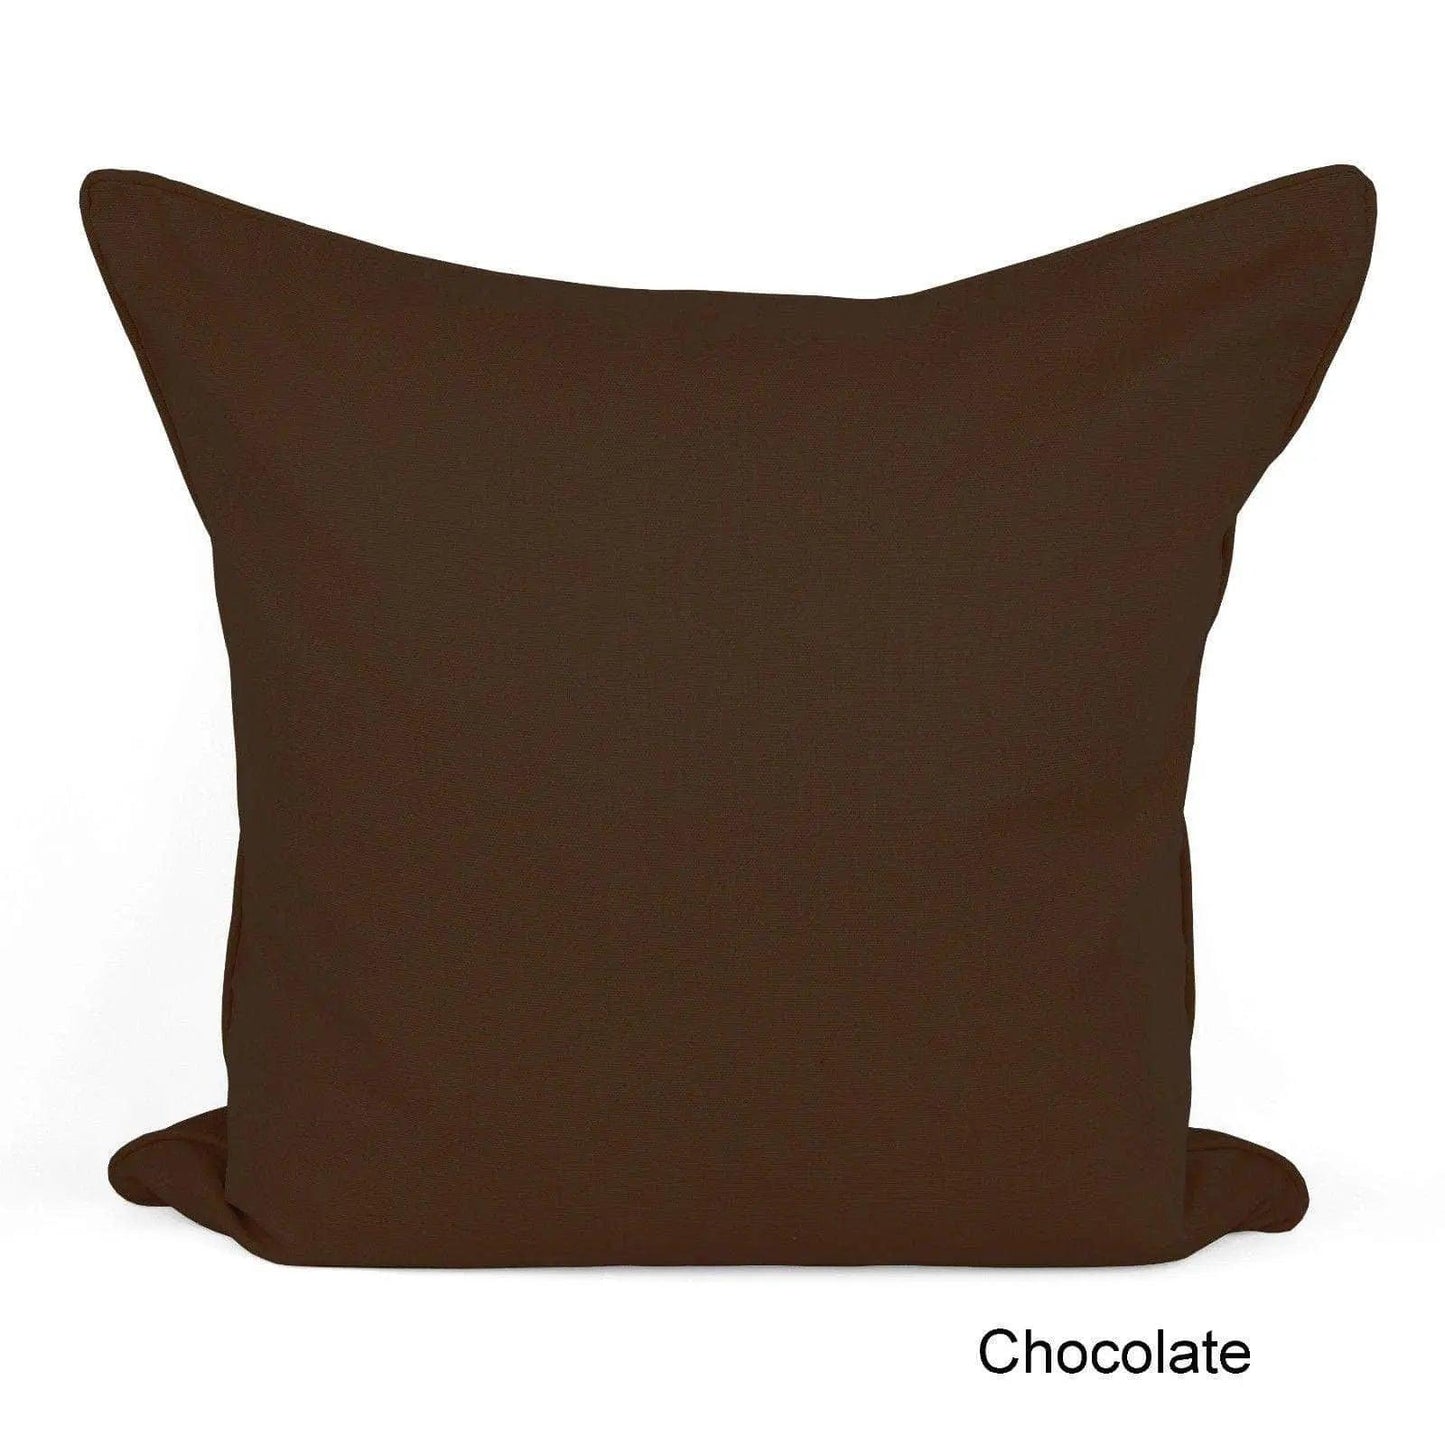 a brown pillow sitting on top of a white floor